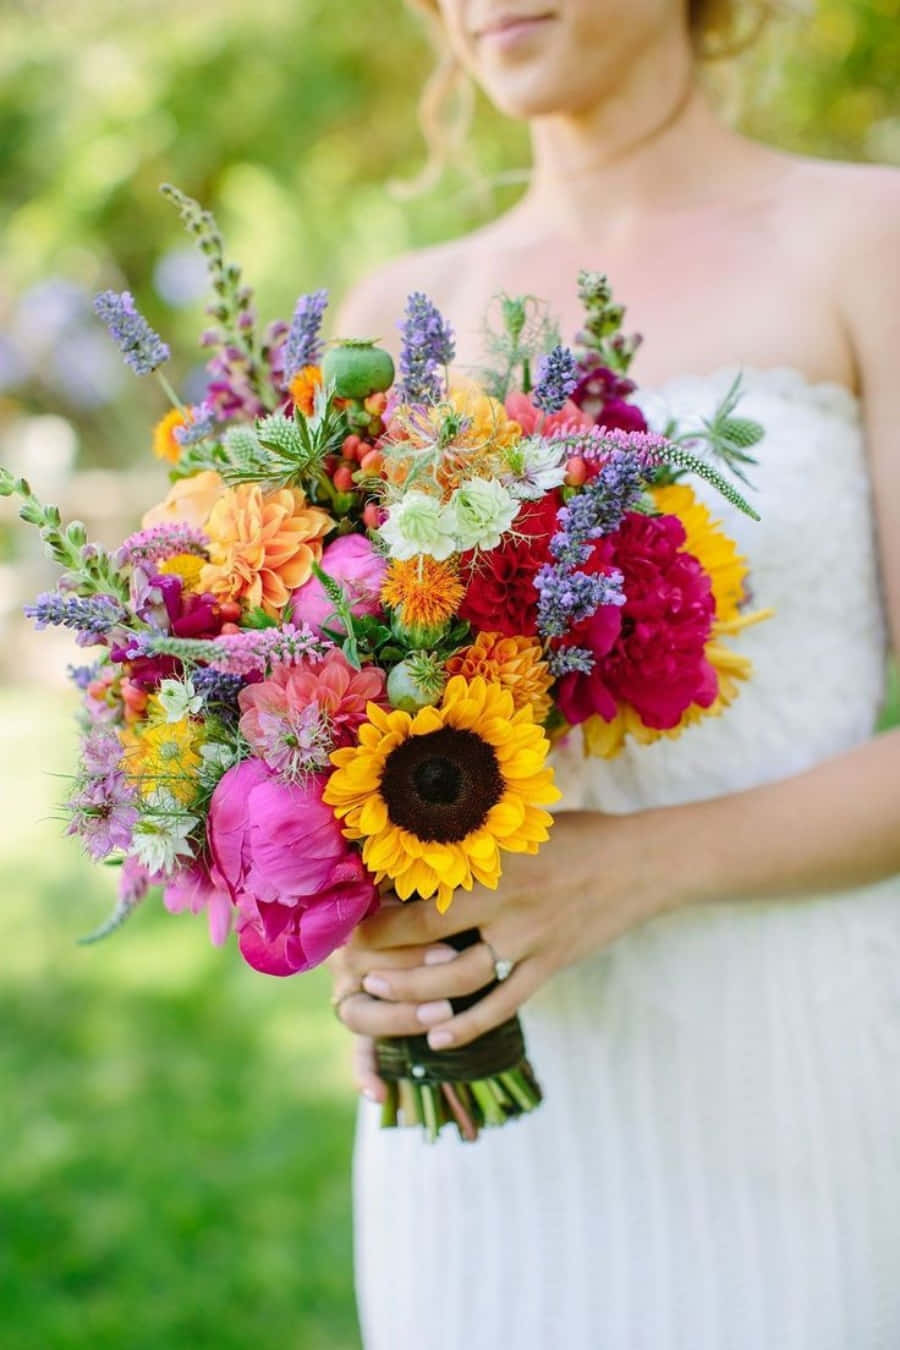 Send Someone You Love a Colorful Flower Bouquet